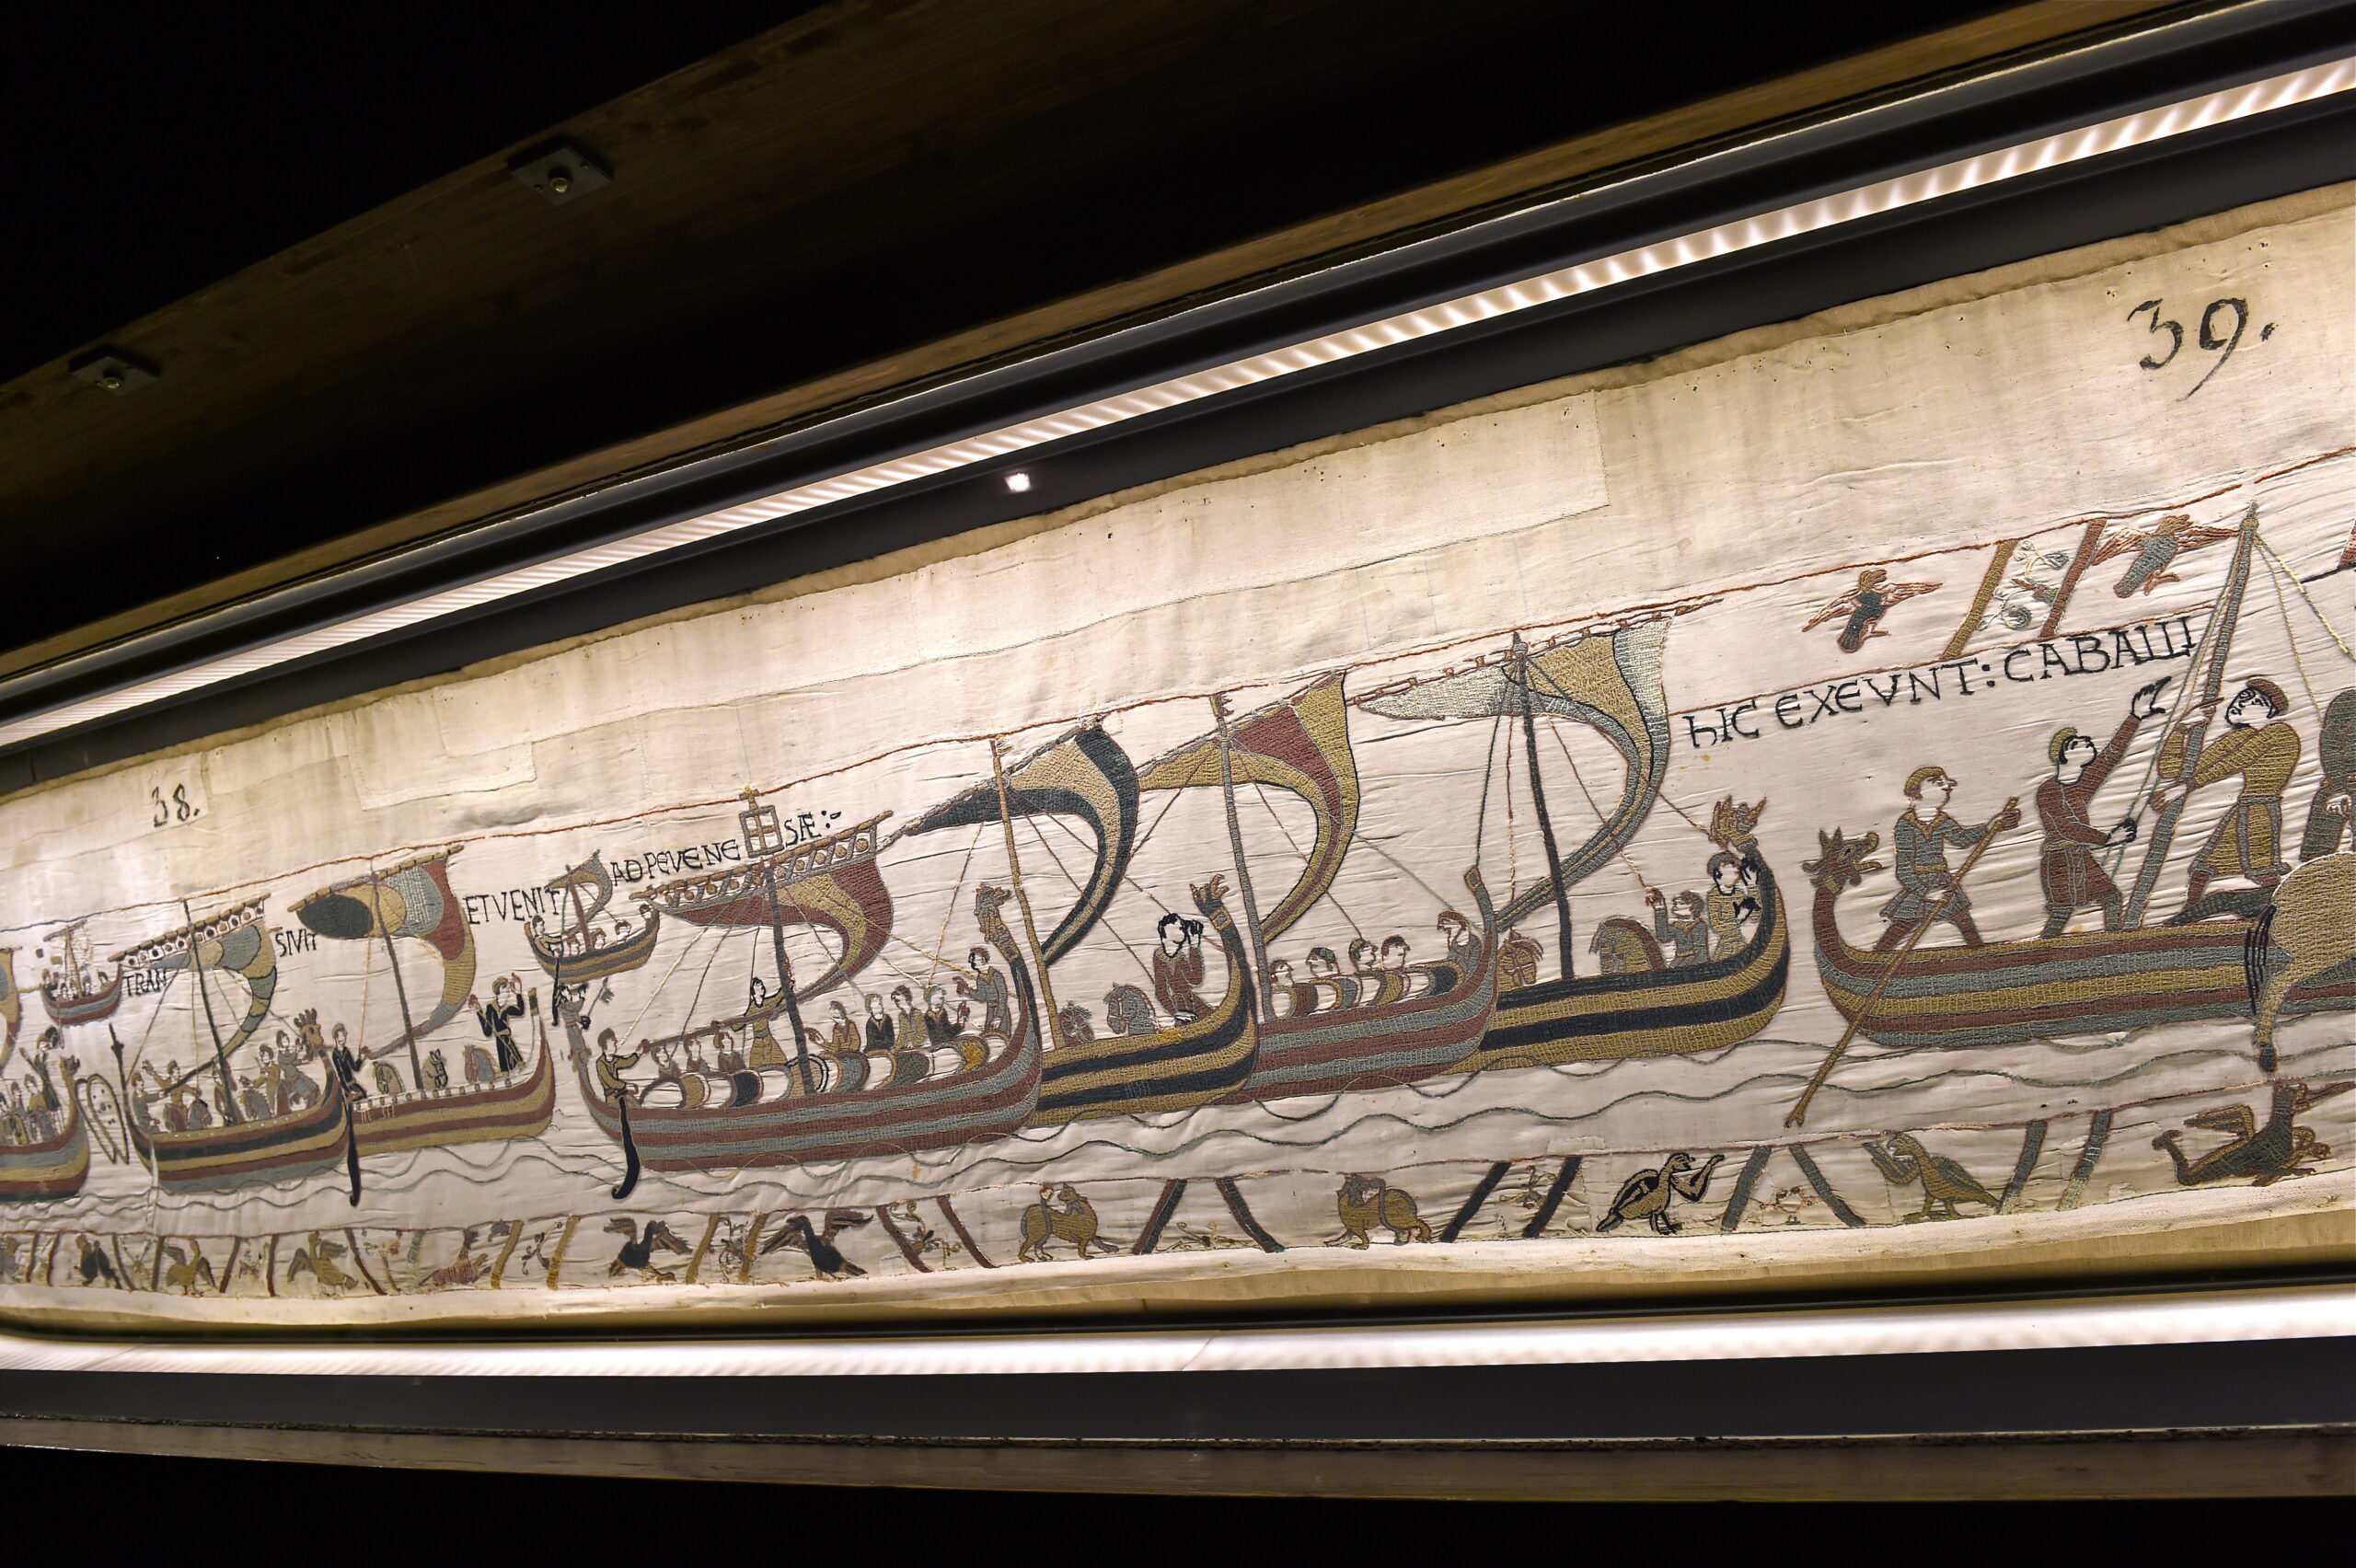 Inside the Bayeux Tapestry Museum